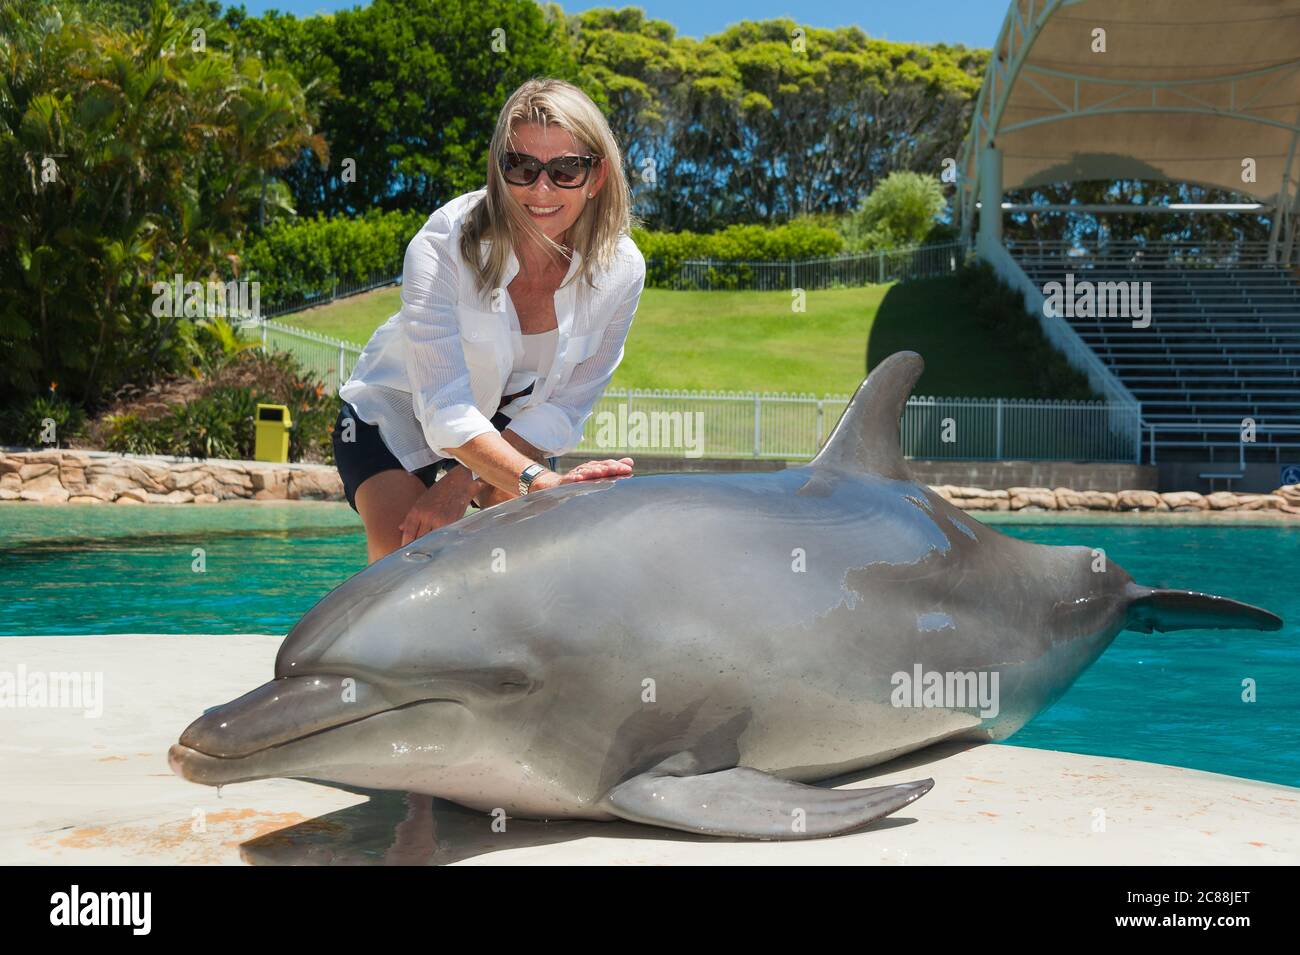 A female tourist patting a beached dolphin at the dolphin display pool at Sea World on the Gold Coast, Queensland Australia. Stock Photo